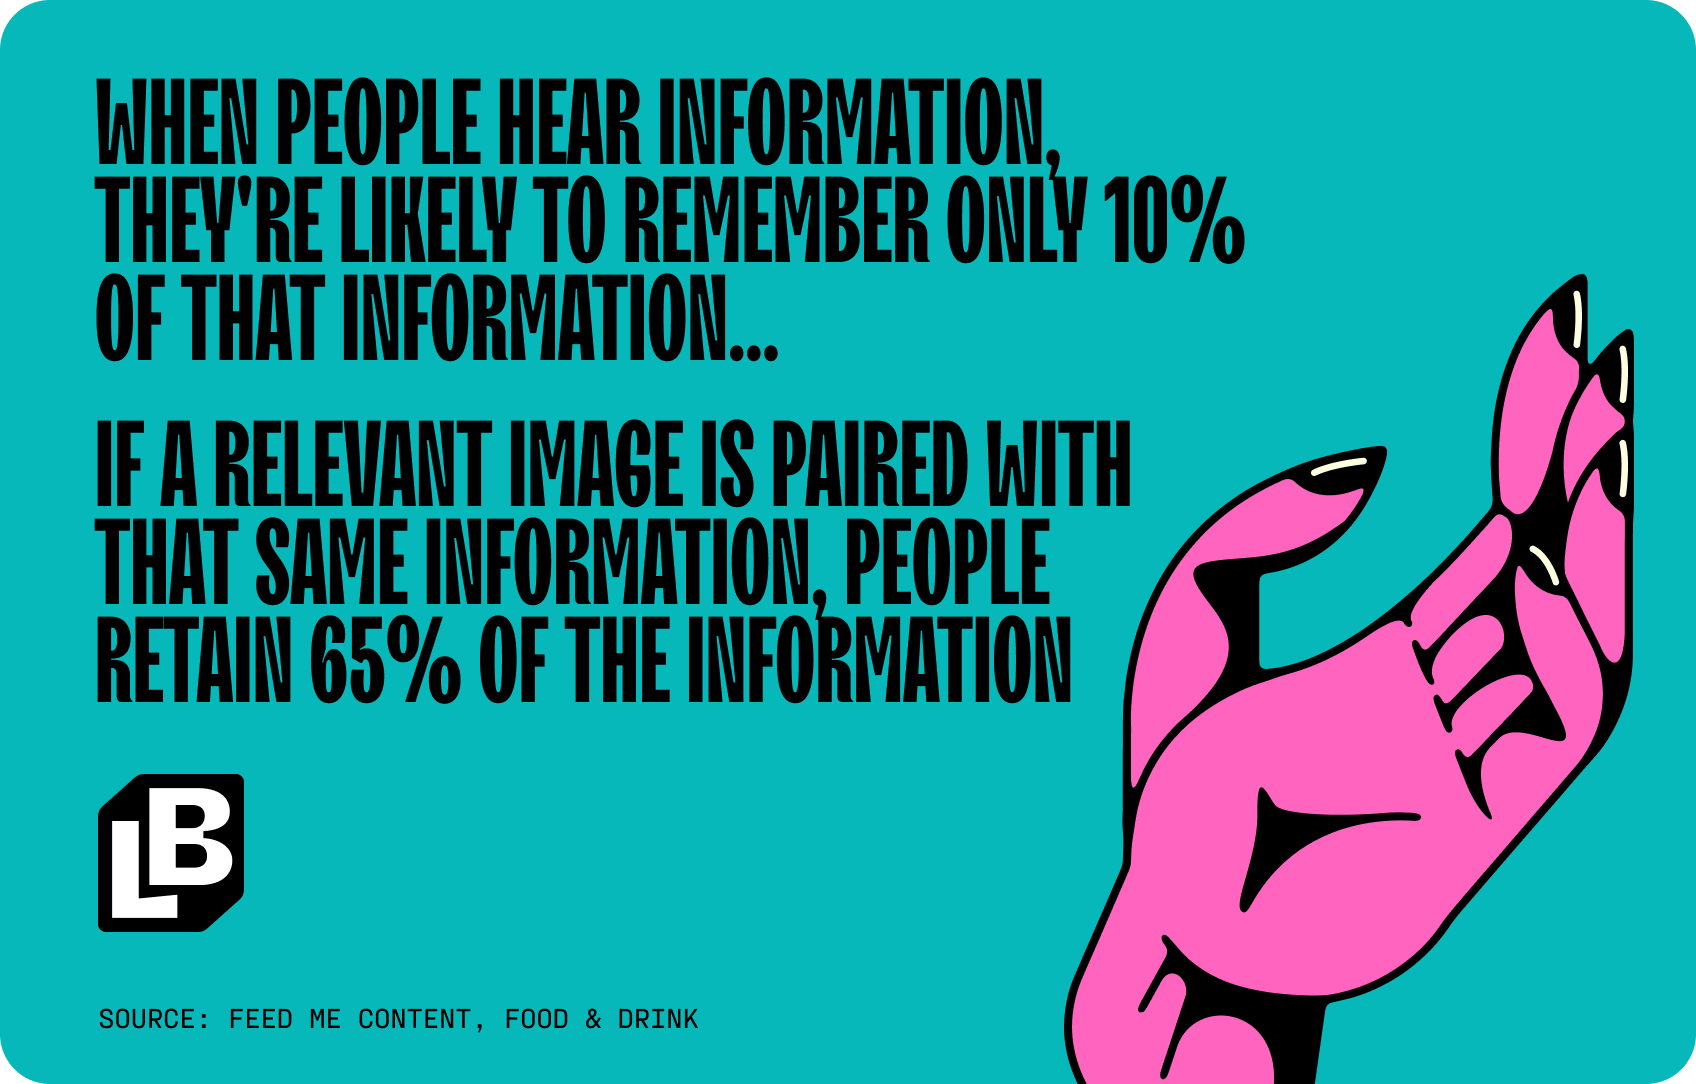 “When people hear information, they're likely to remember only 10% of that information [...] if a relevant image is paired with that same information, people retain 65% of the information.” Feed Me Content, Food & Drink. 